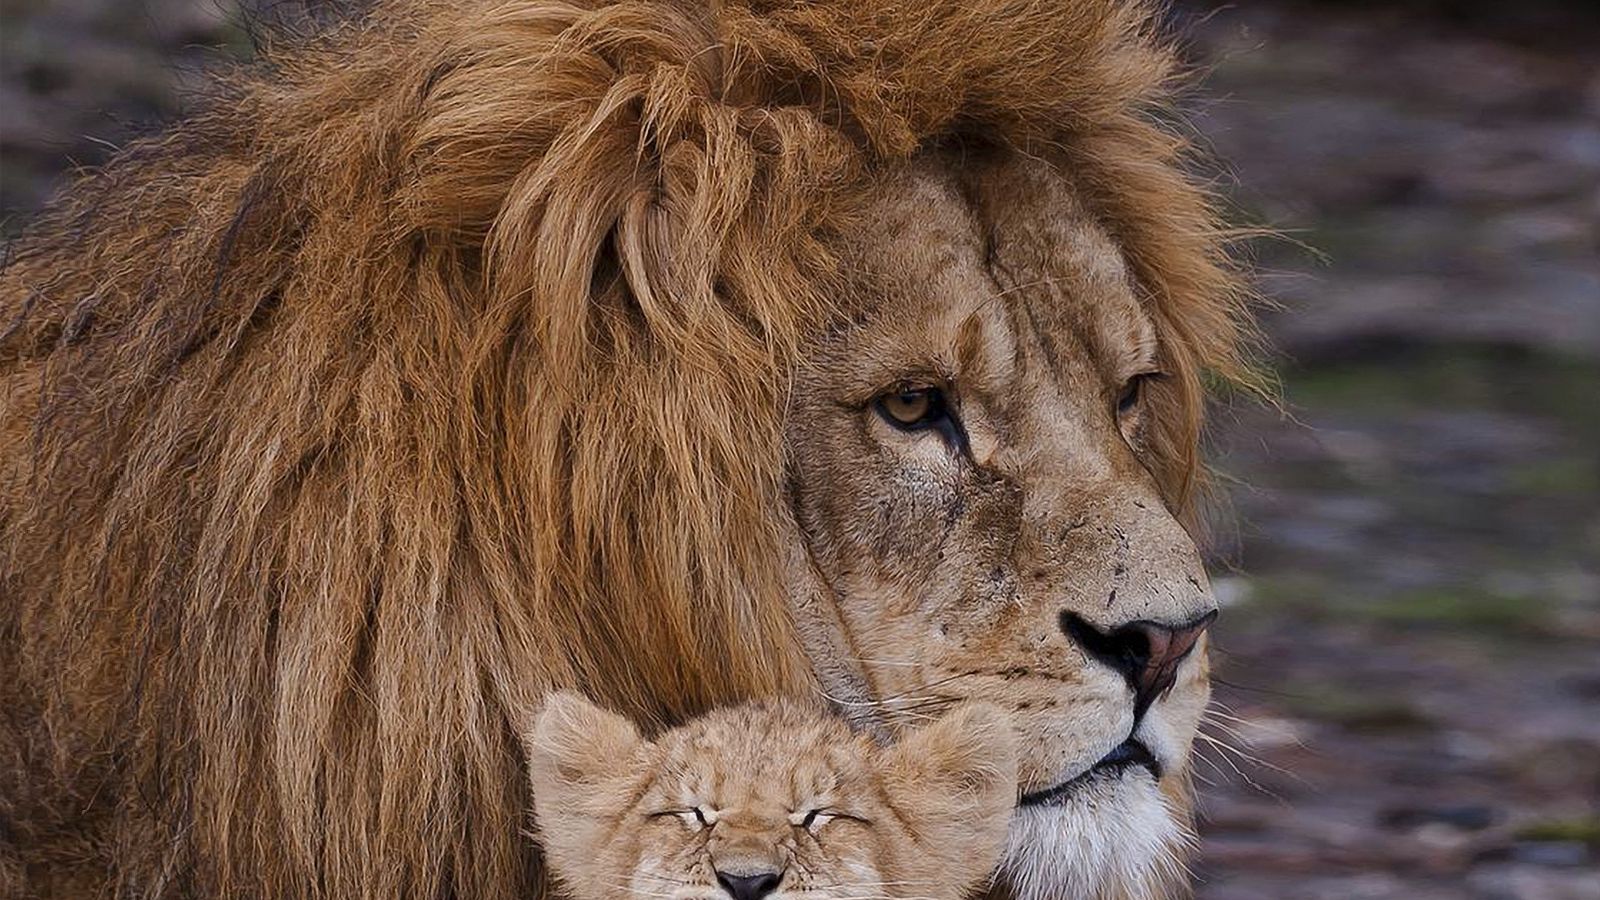 Download wallpaper 1600x900 lion, cub, mane, caring, family widescreen 16:9  hd background